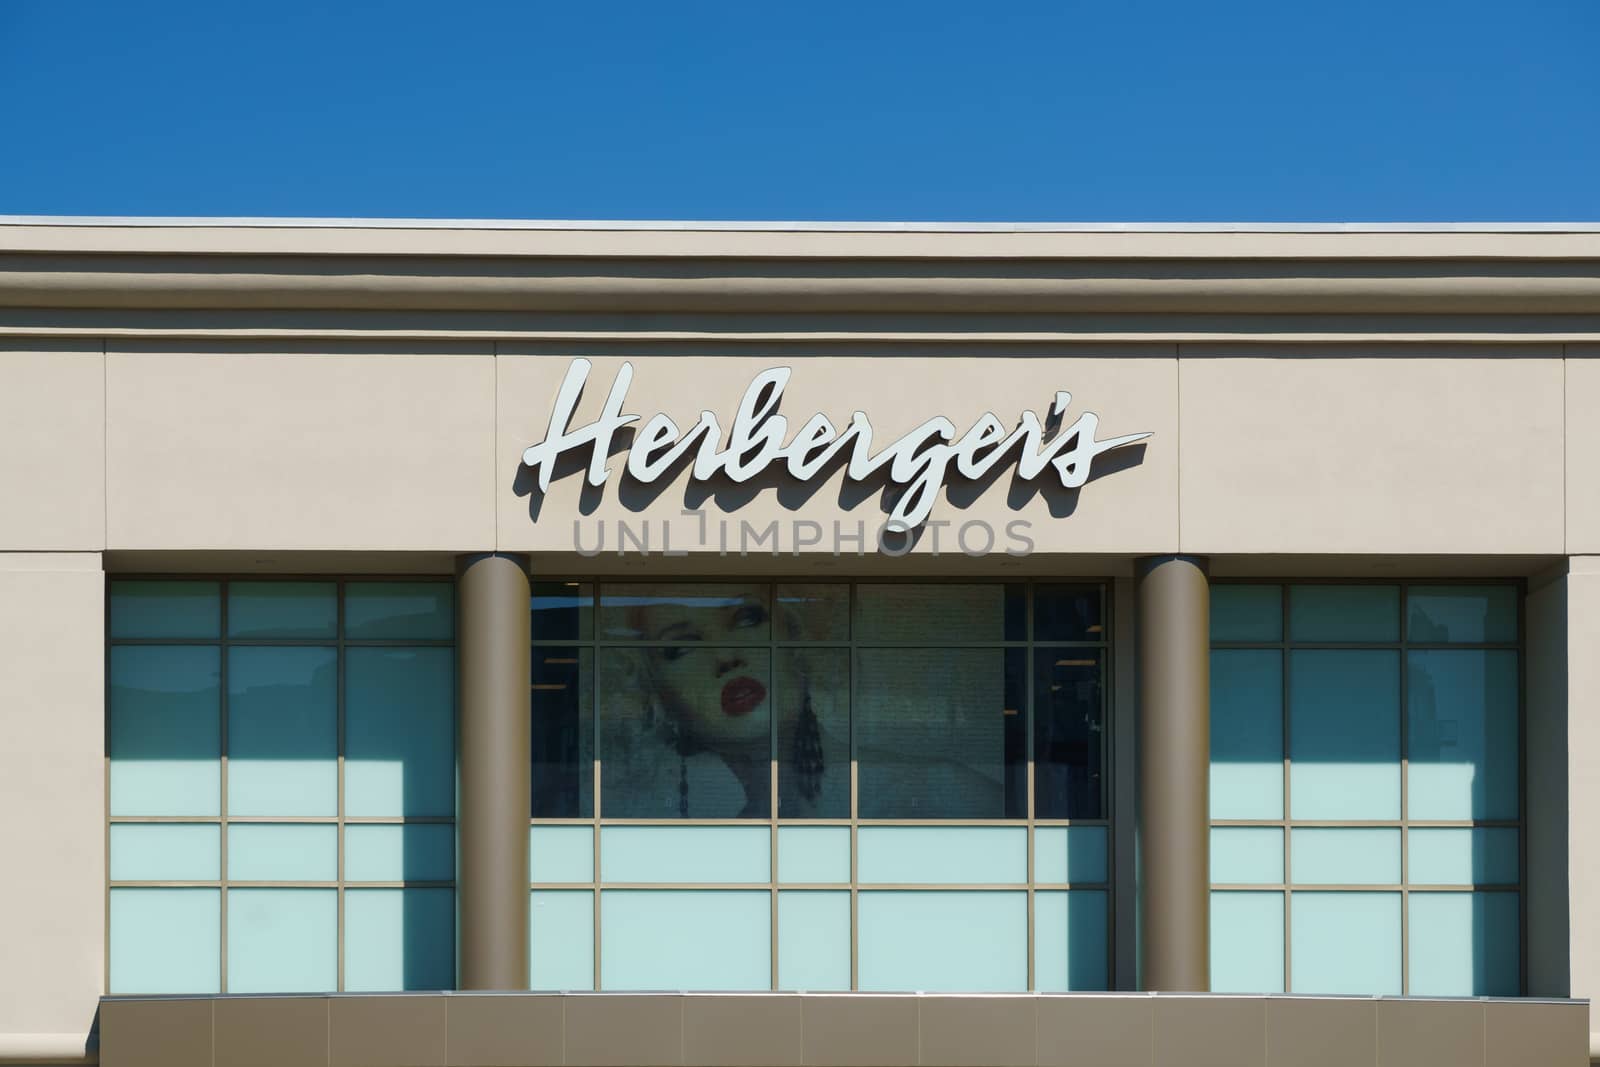 EDINA, MN/USA - AUGUST 11, 2015: Herberger's store exterior. Herberger's is a regional department store chain founded in Minnesota.